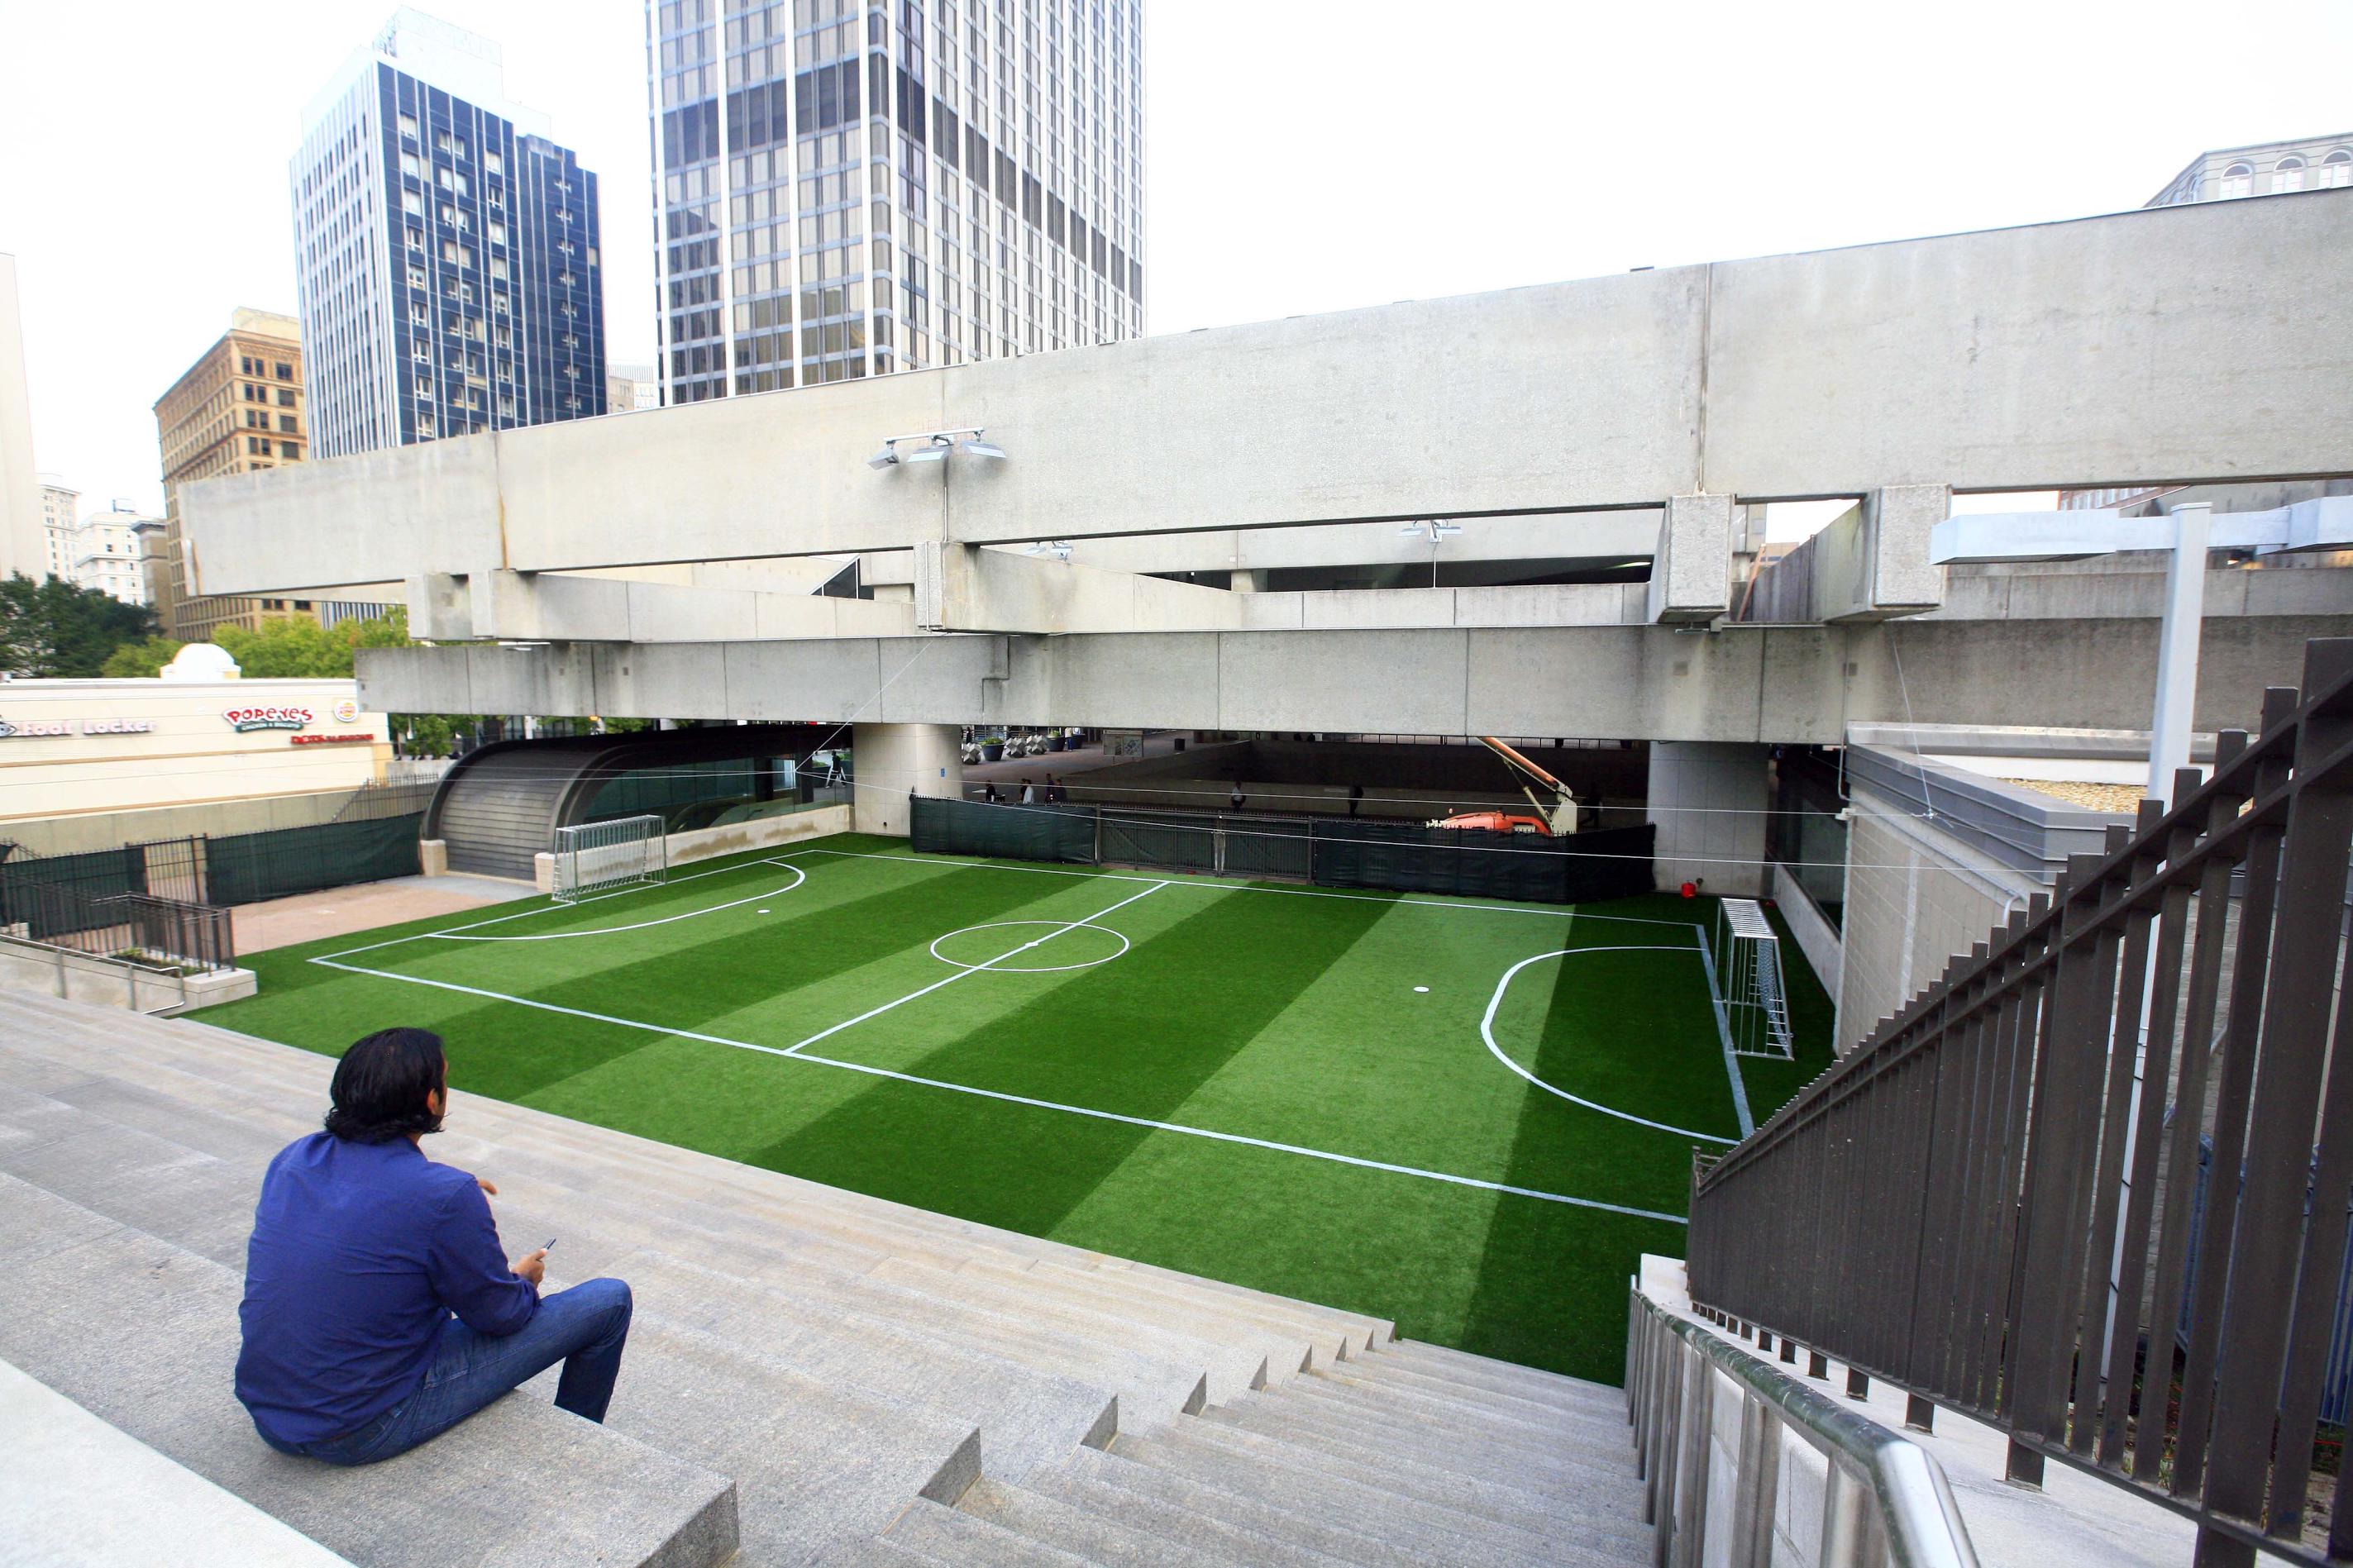 In Atlanta, the First Football Field In a Metro Station Builds Community Through Soccer